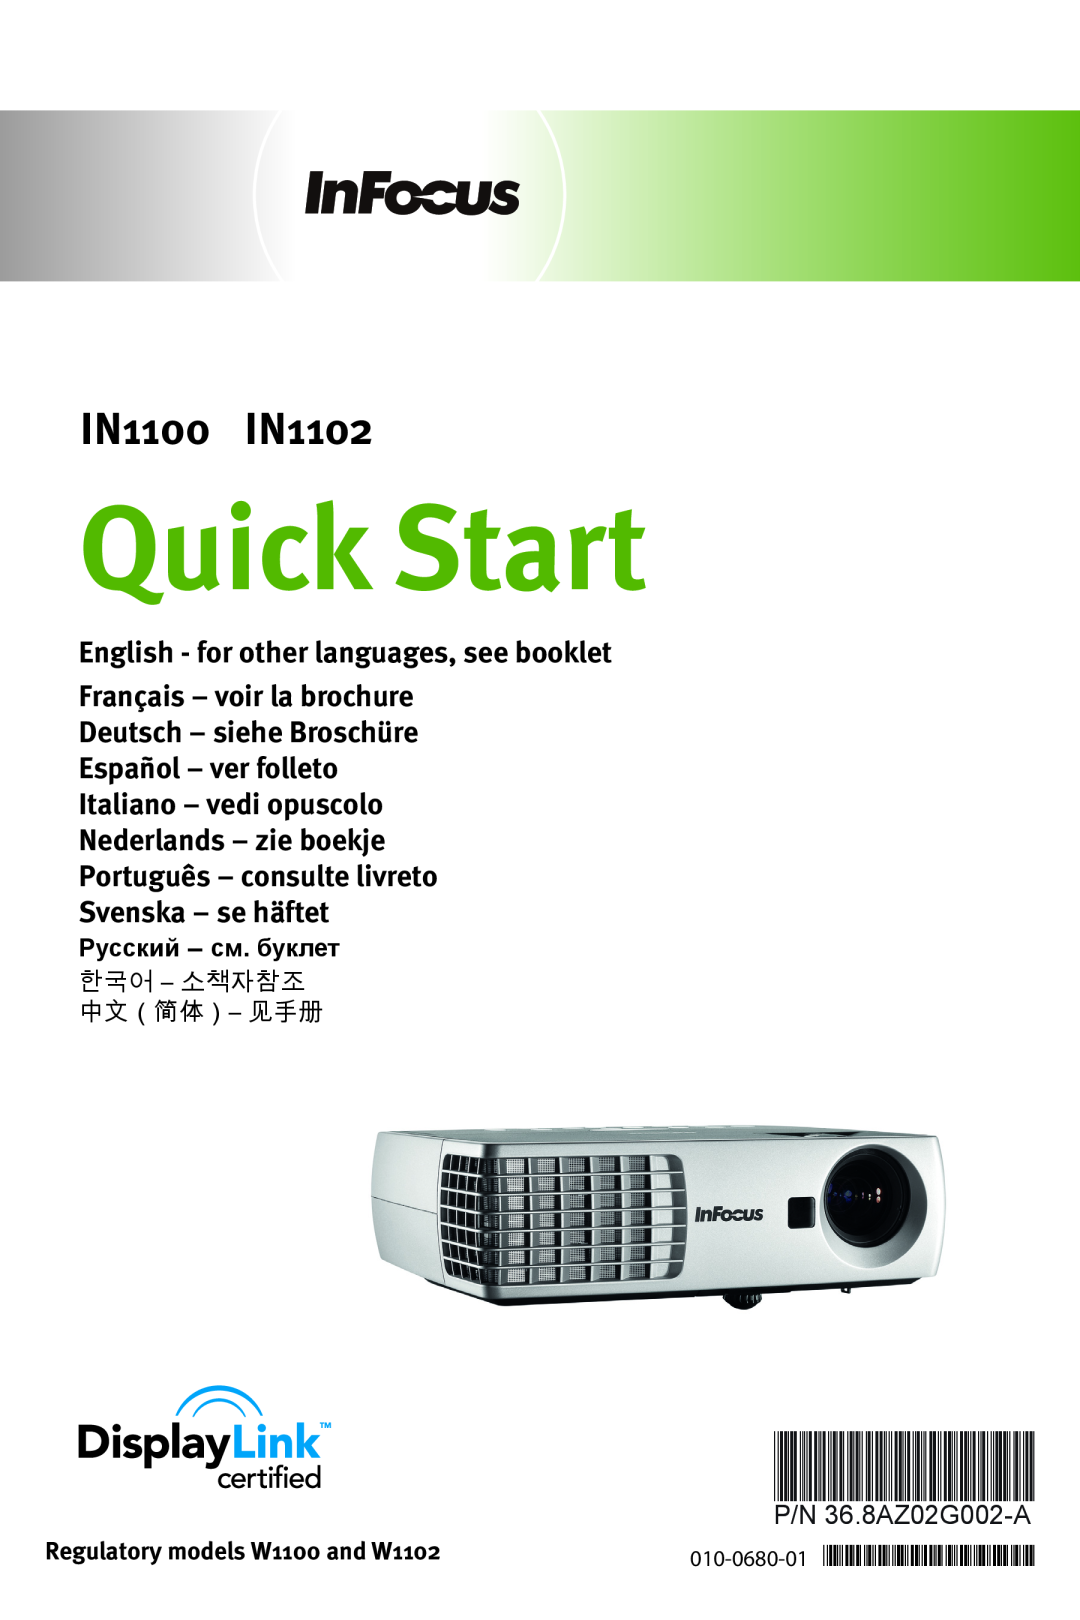 InFocus quick start English - for other languages, see booklet, Quick Start, 36.8AZ02G002-A, IN1100 IN1102 